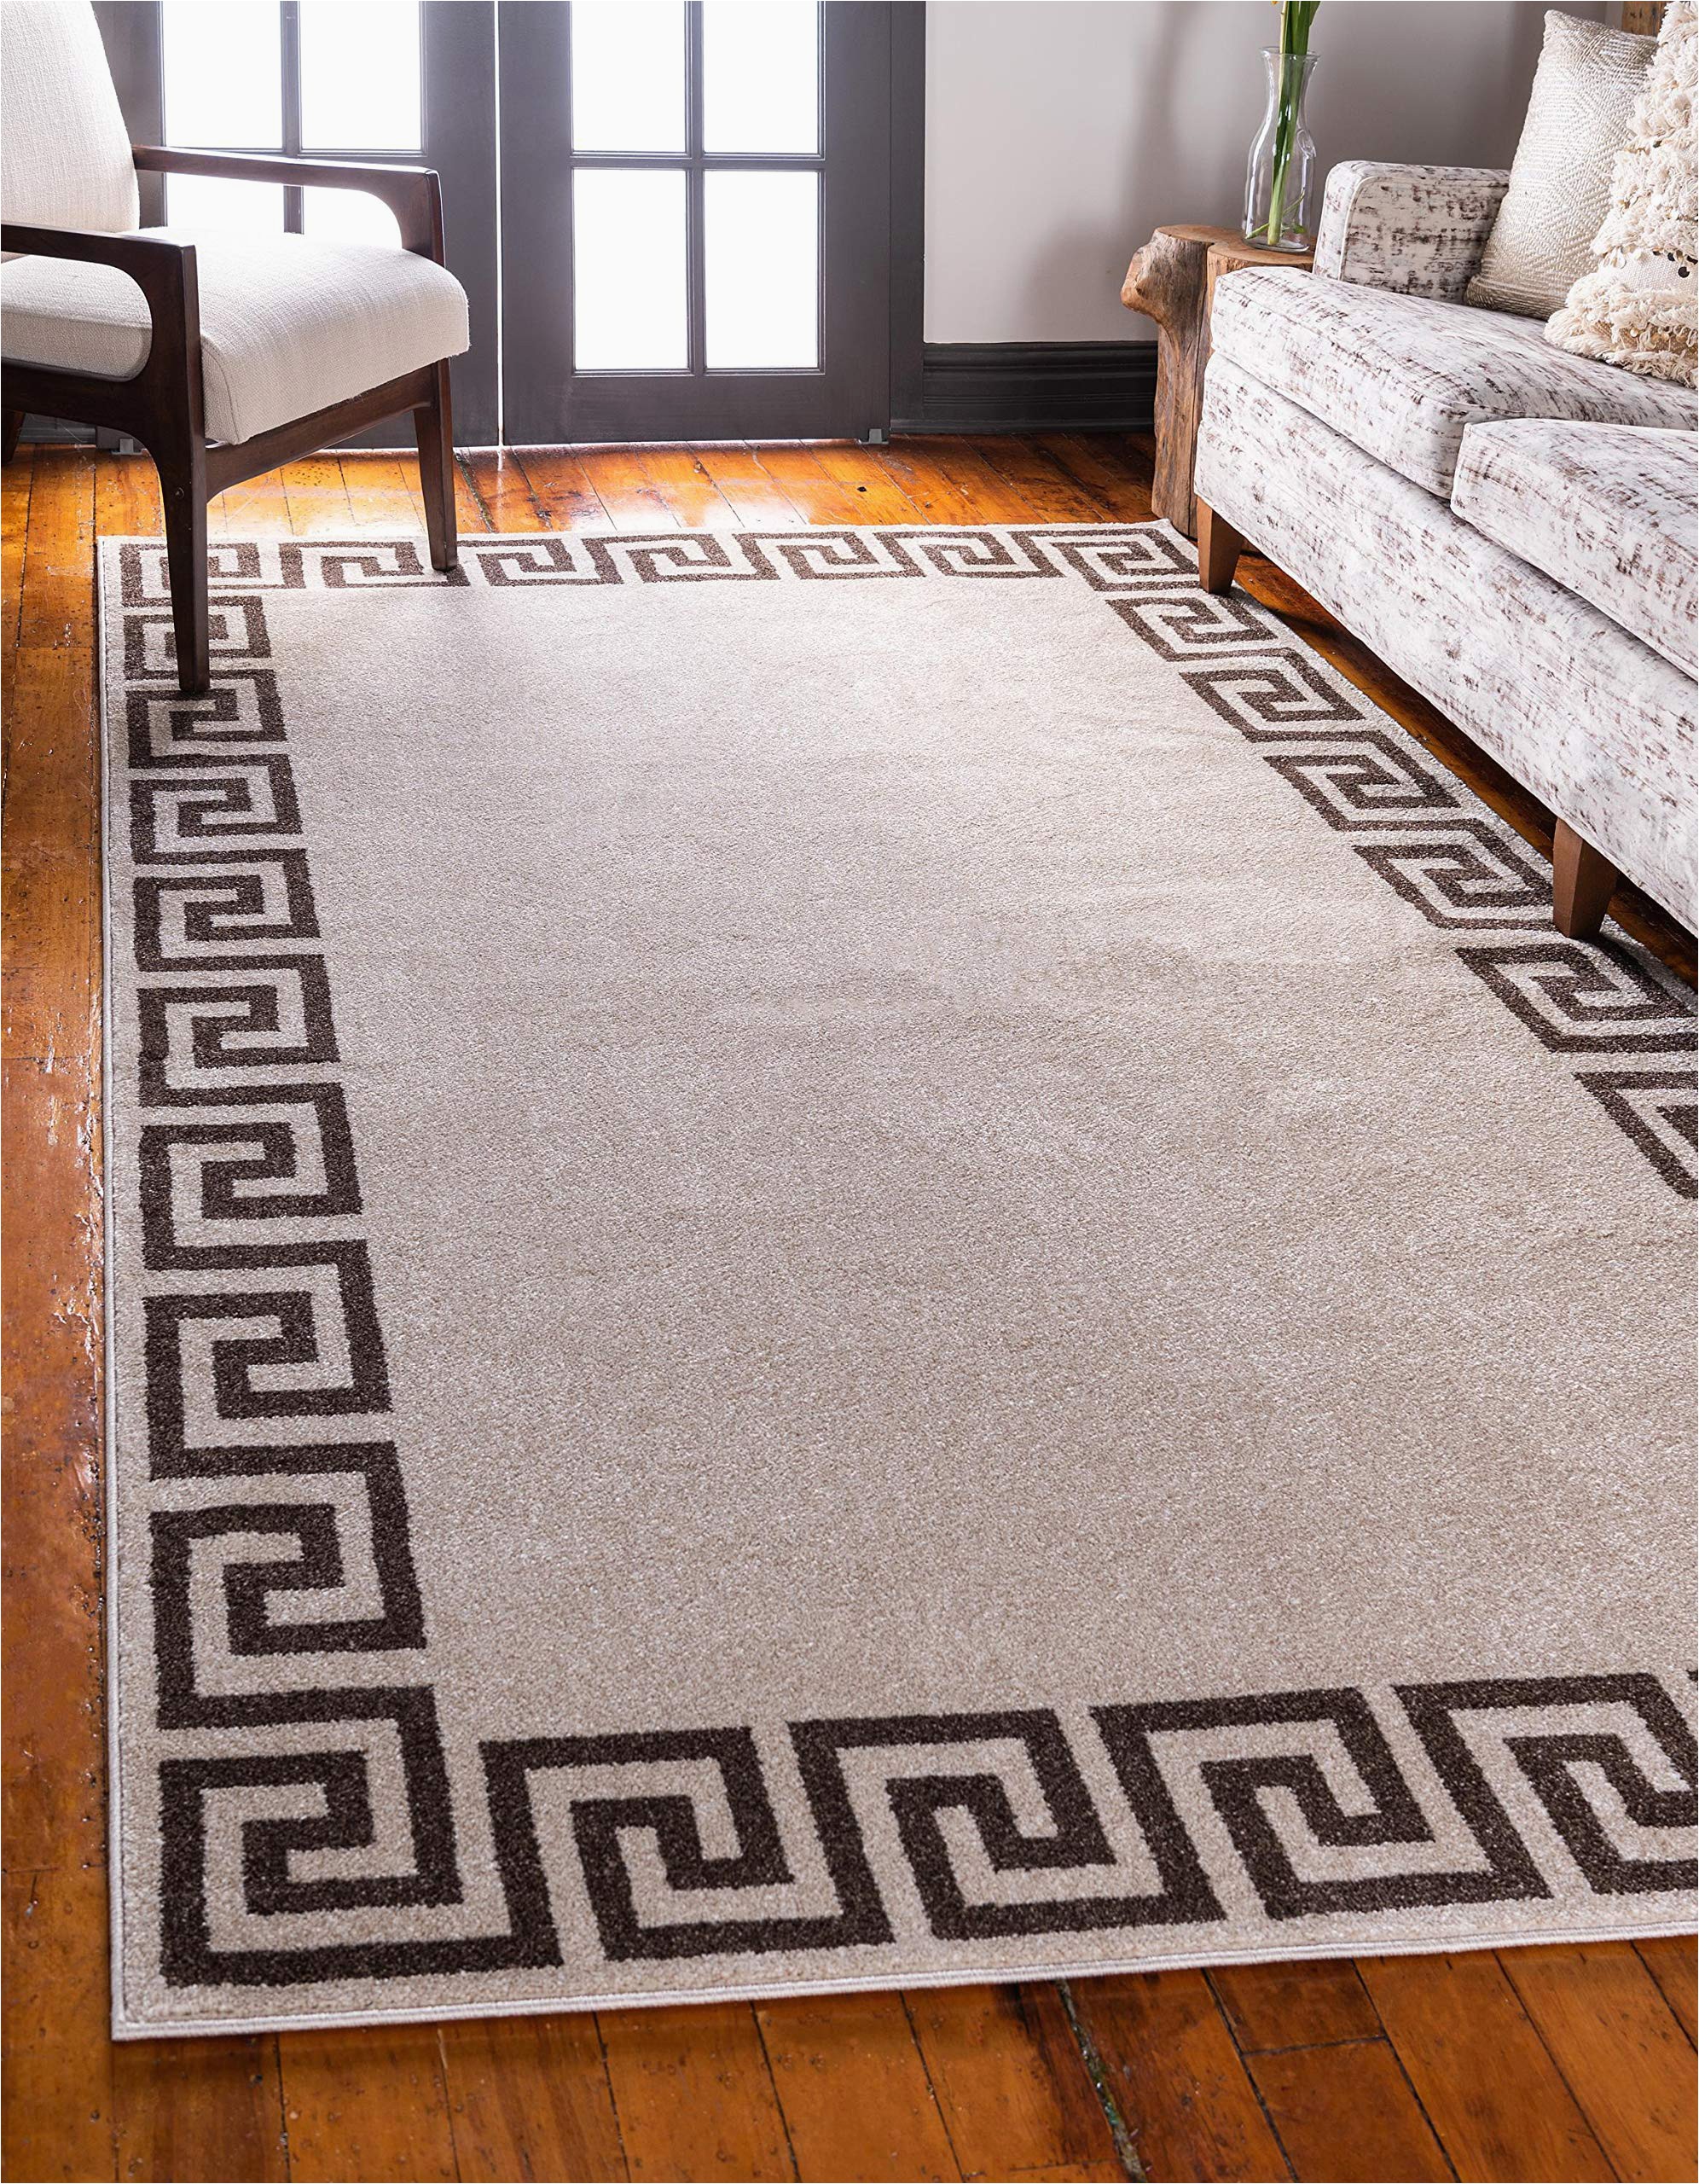 Black Friday area Rugs 2019 Unique Loom athens Geometric Casual area Rug 5 0 X 8 0 Beige Brown